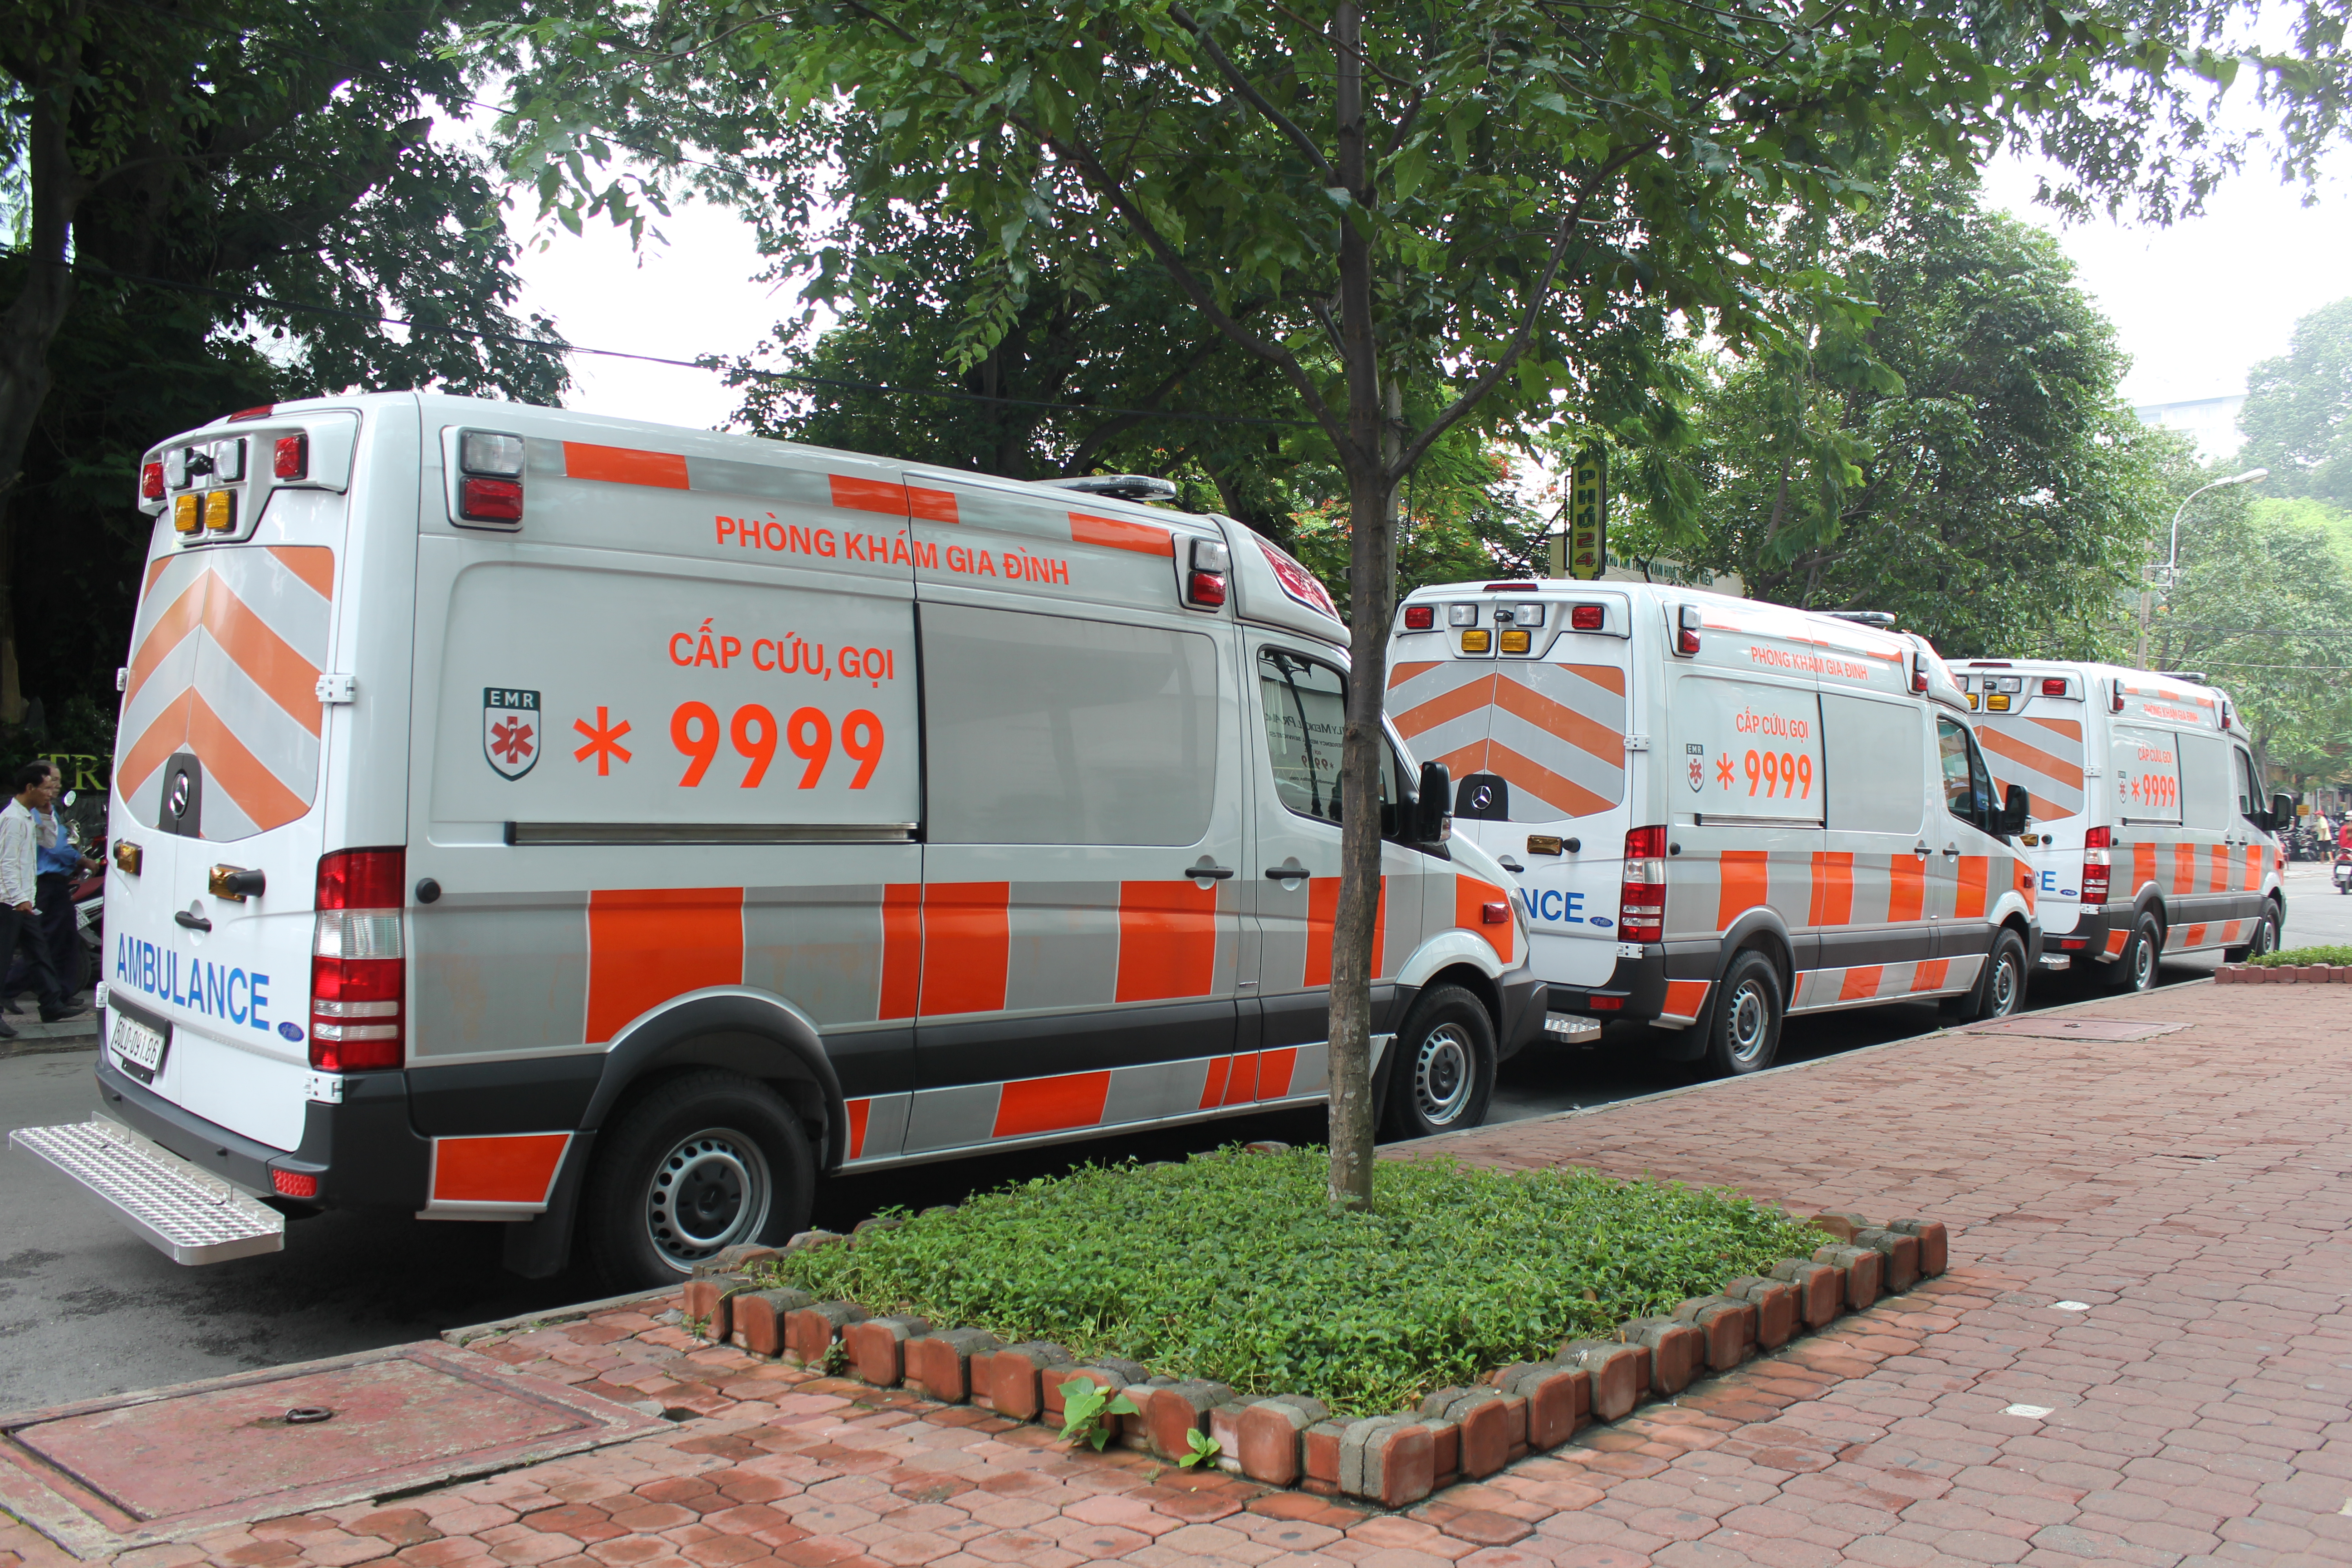 family medical practice invests in new ambulance fleet for emergency response